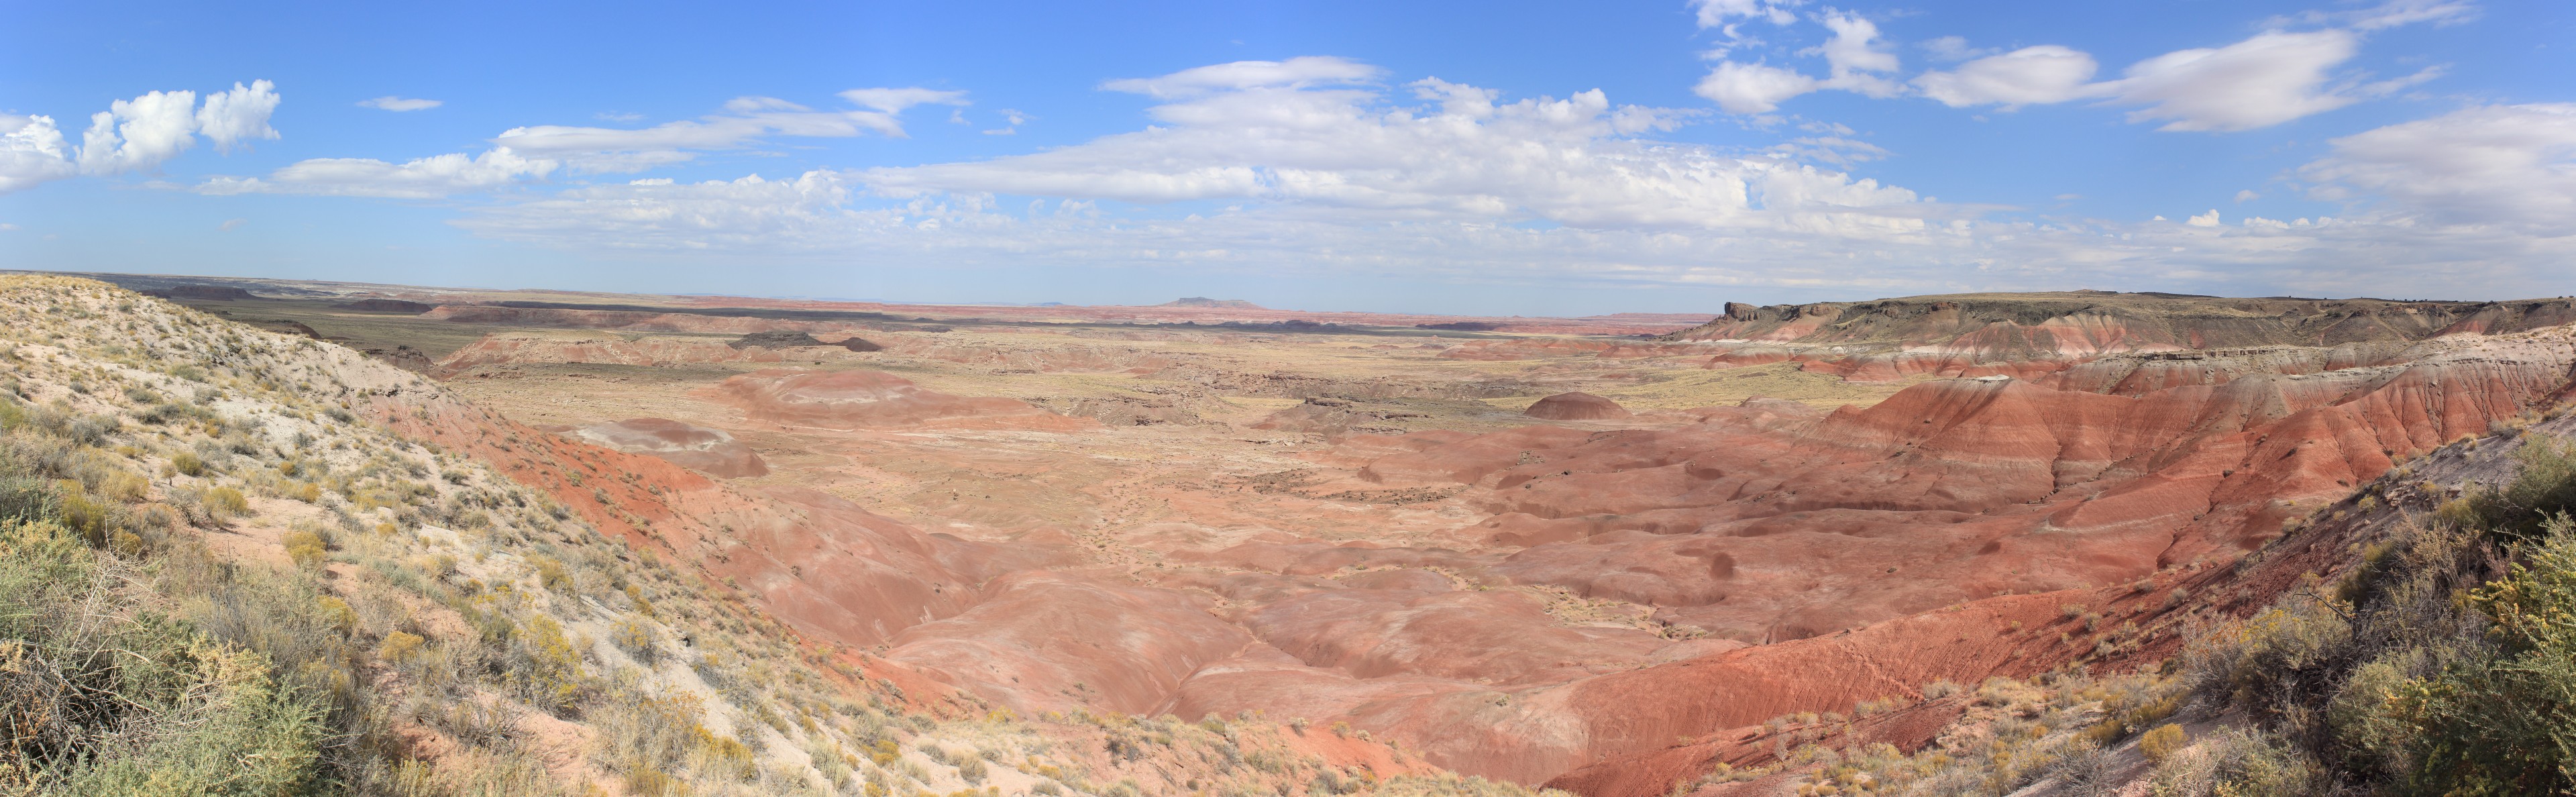 The Painted Desert. A little more sun than the northern most view. Here is a valley opening up into the Painted Desert.